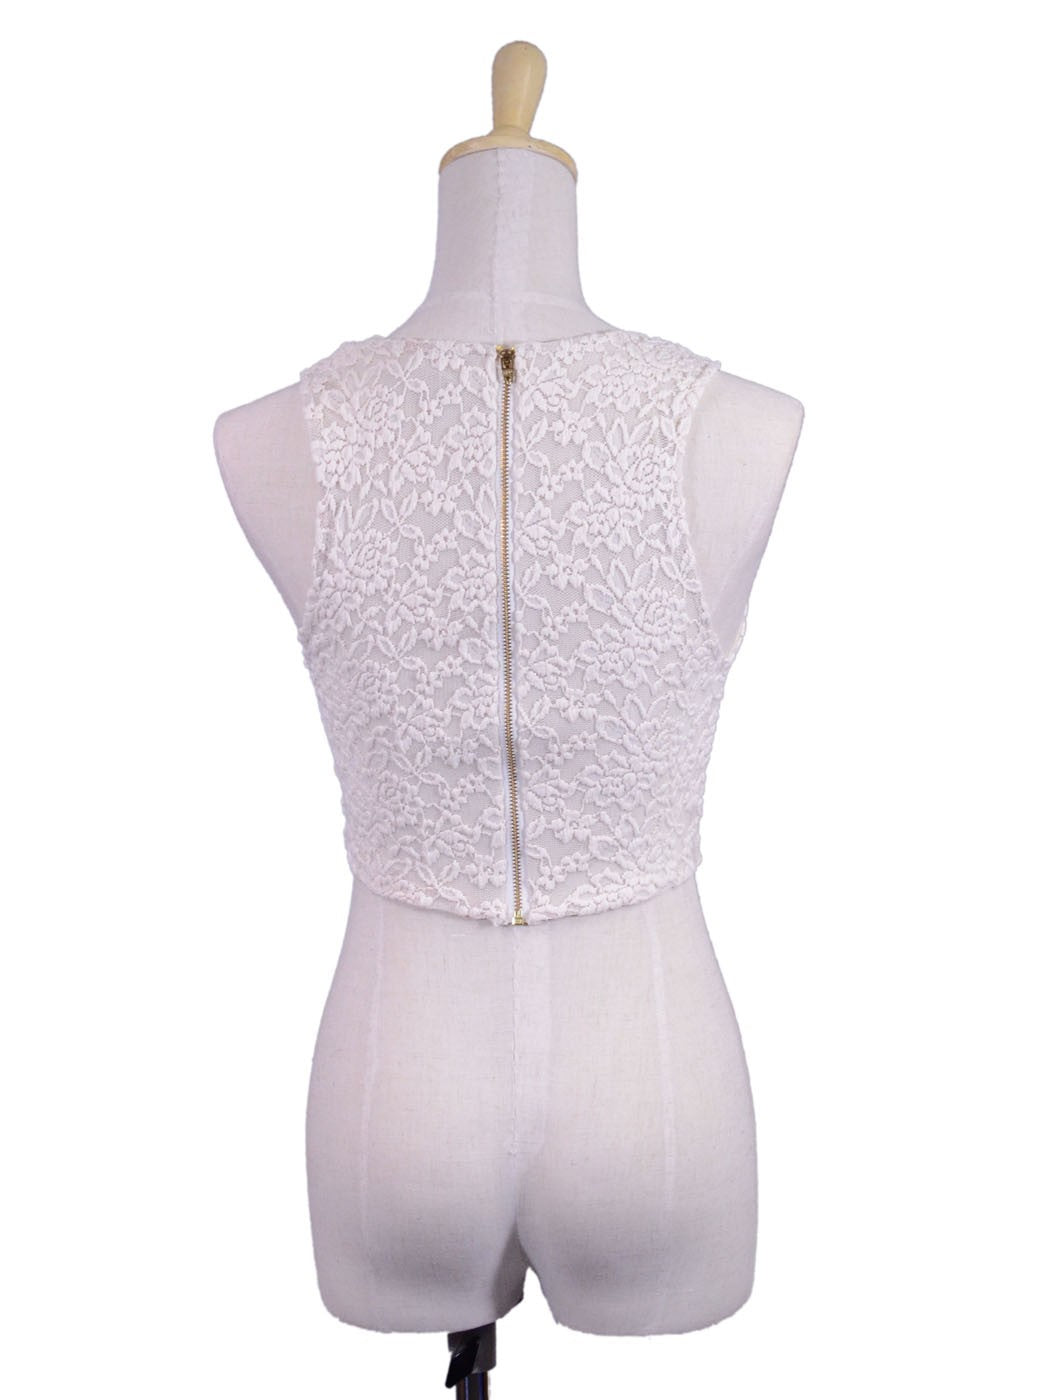 Audrey 3+1 Lady Chic Lace Floral Sleeveless Exposed Zipper Cropped Top